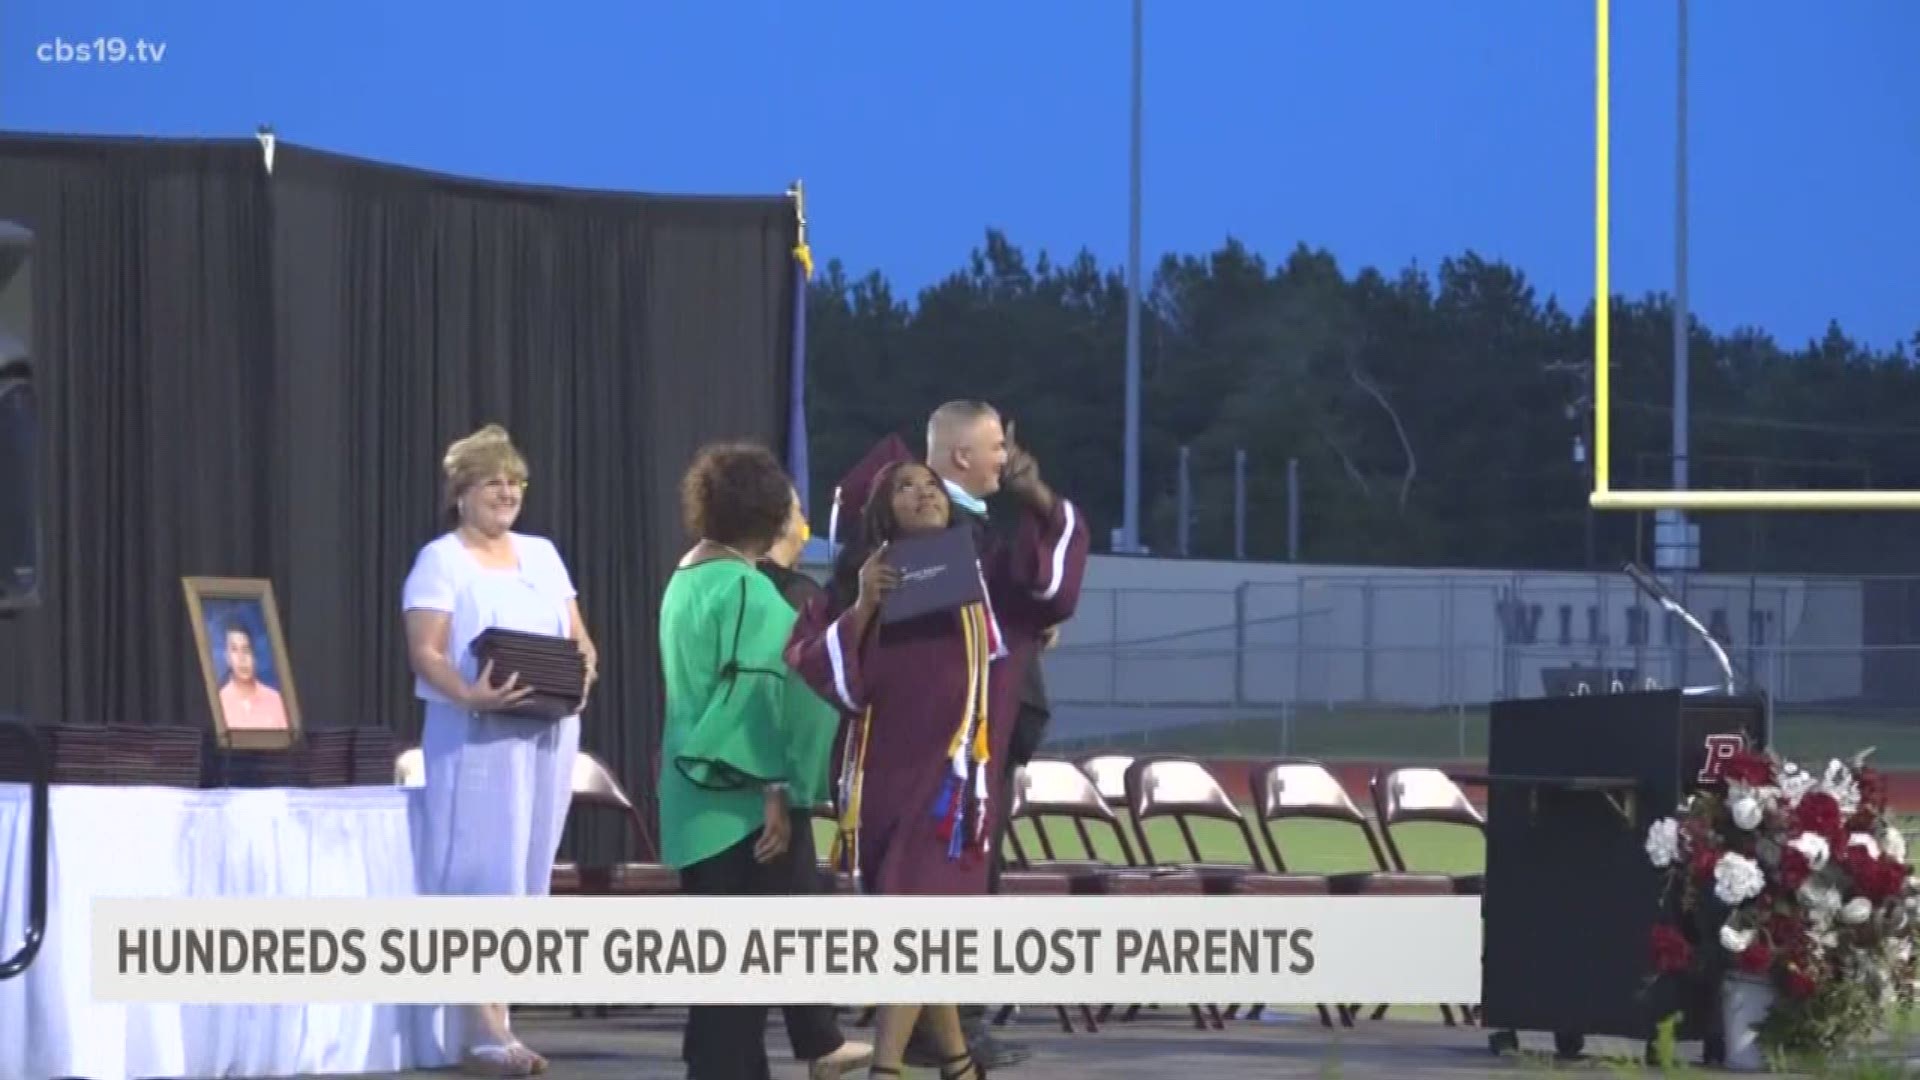 Despite a rough year after losing both of her parents, Chanylla Gibson celebrated her high school graduation in the top ten percent.